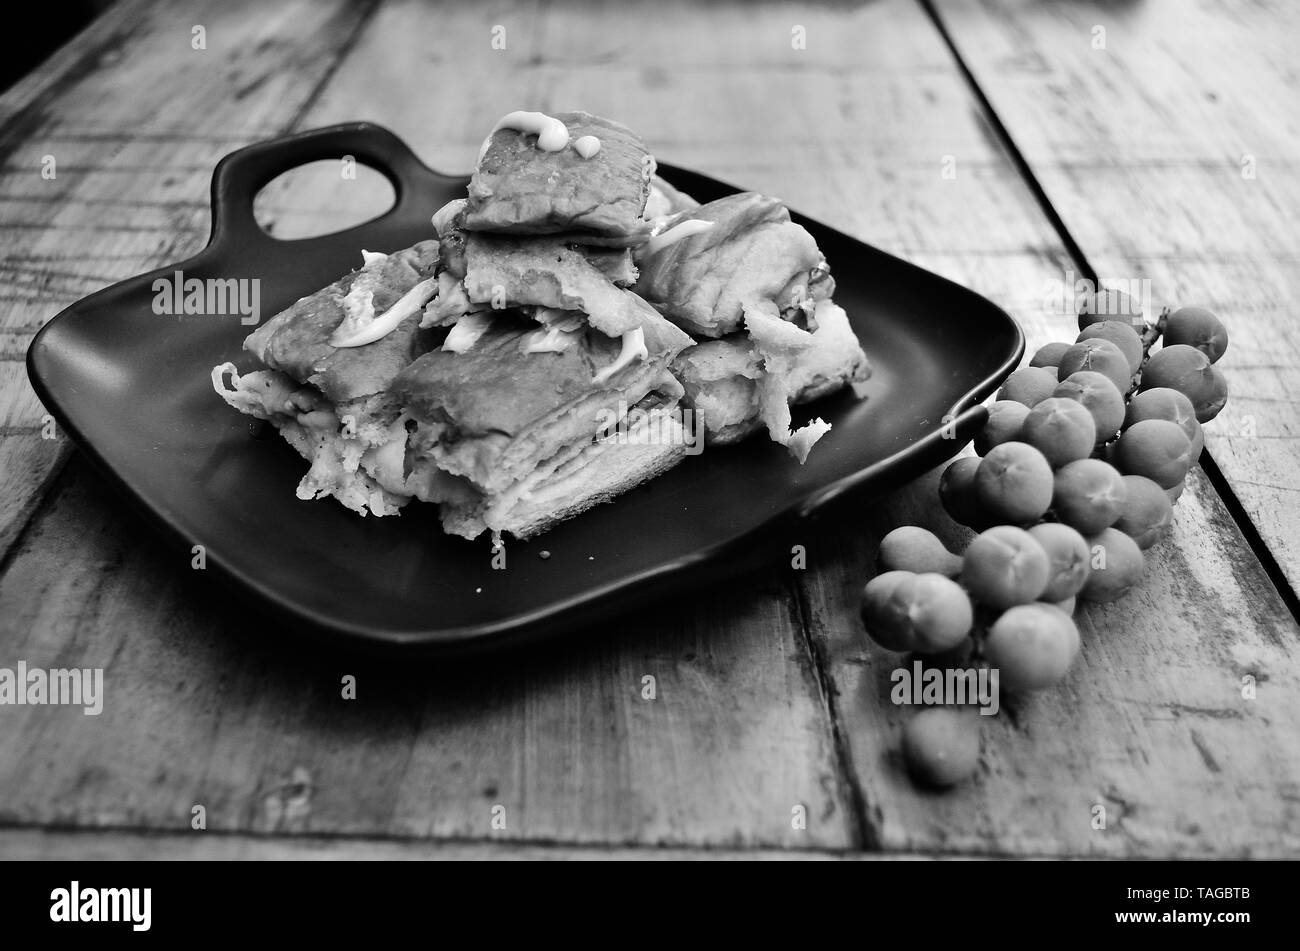 Junk food Black and White Stock Photos & Images - Alamy